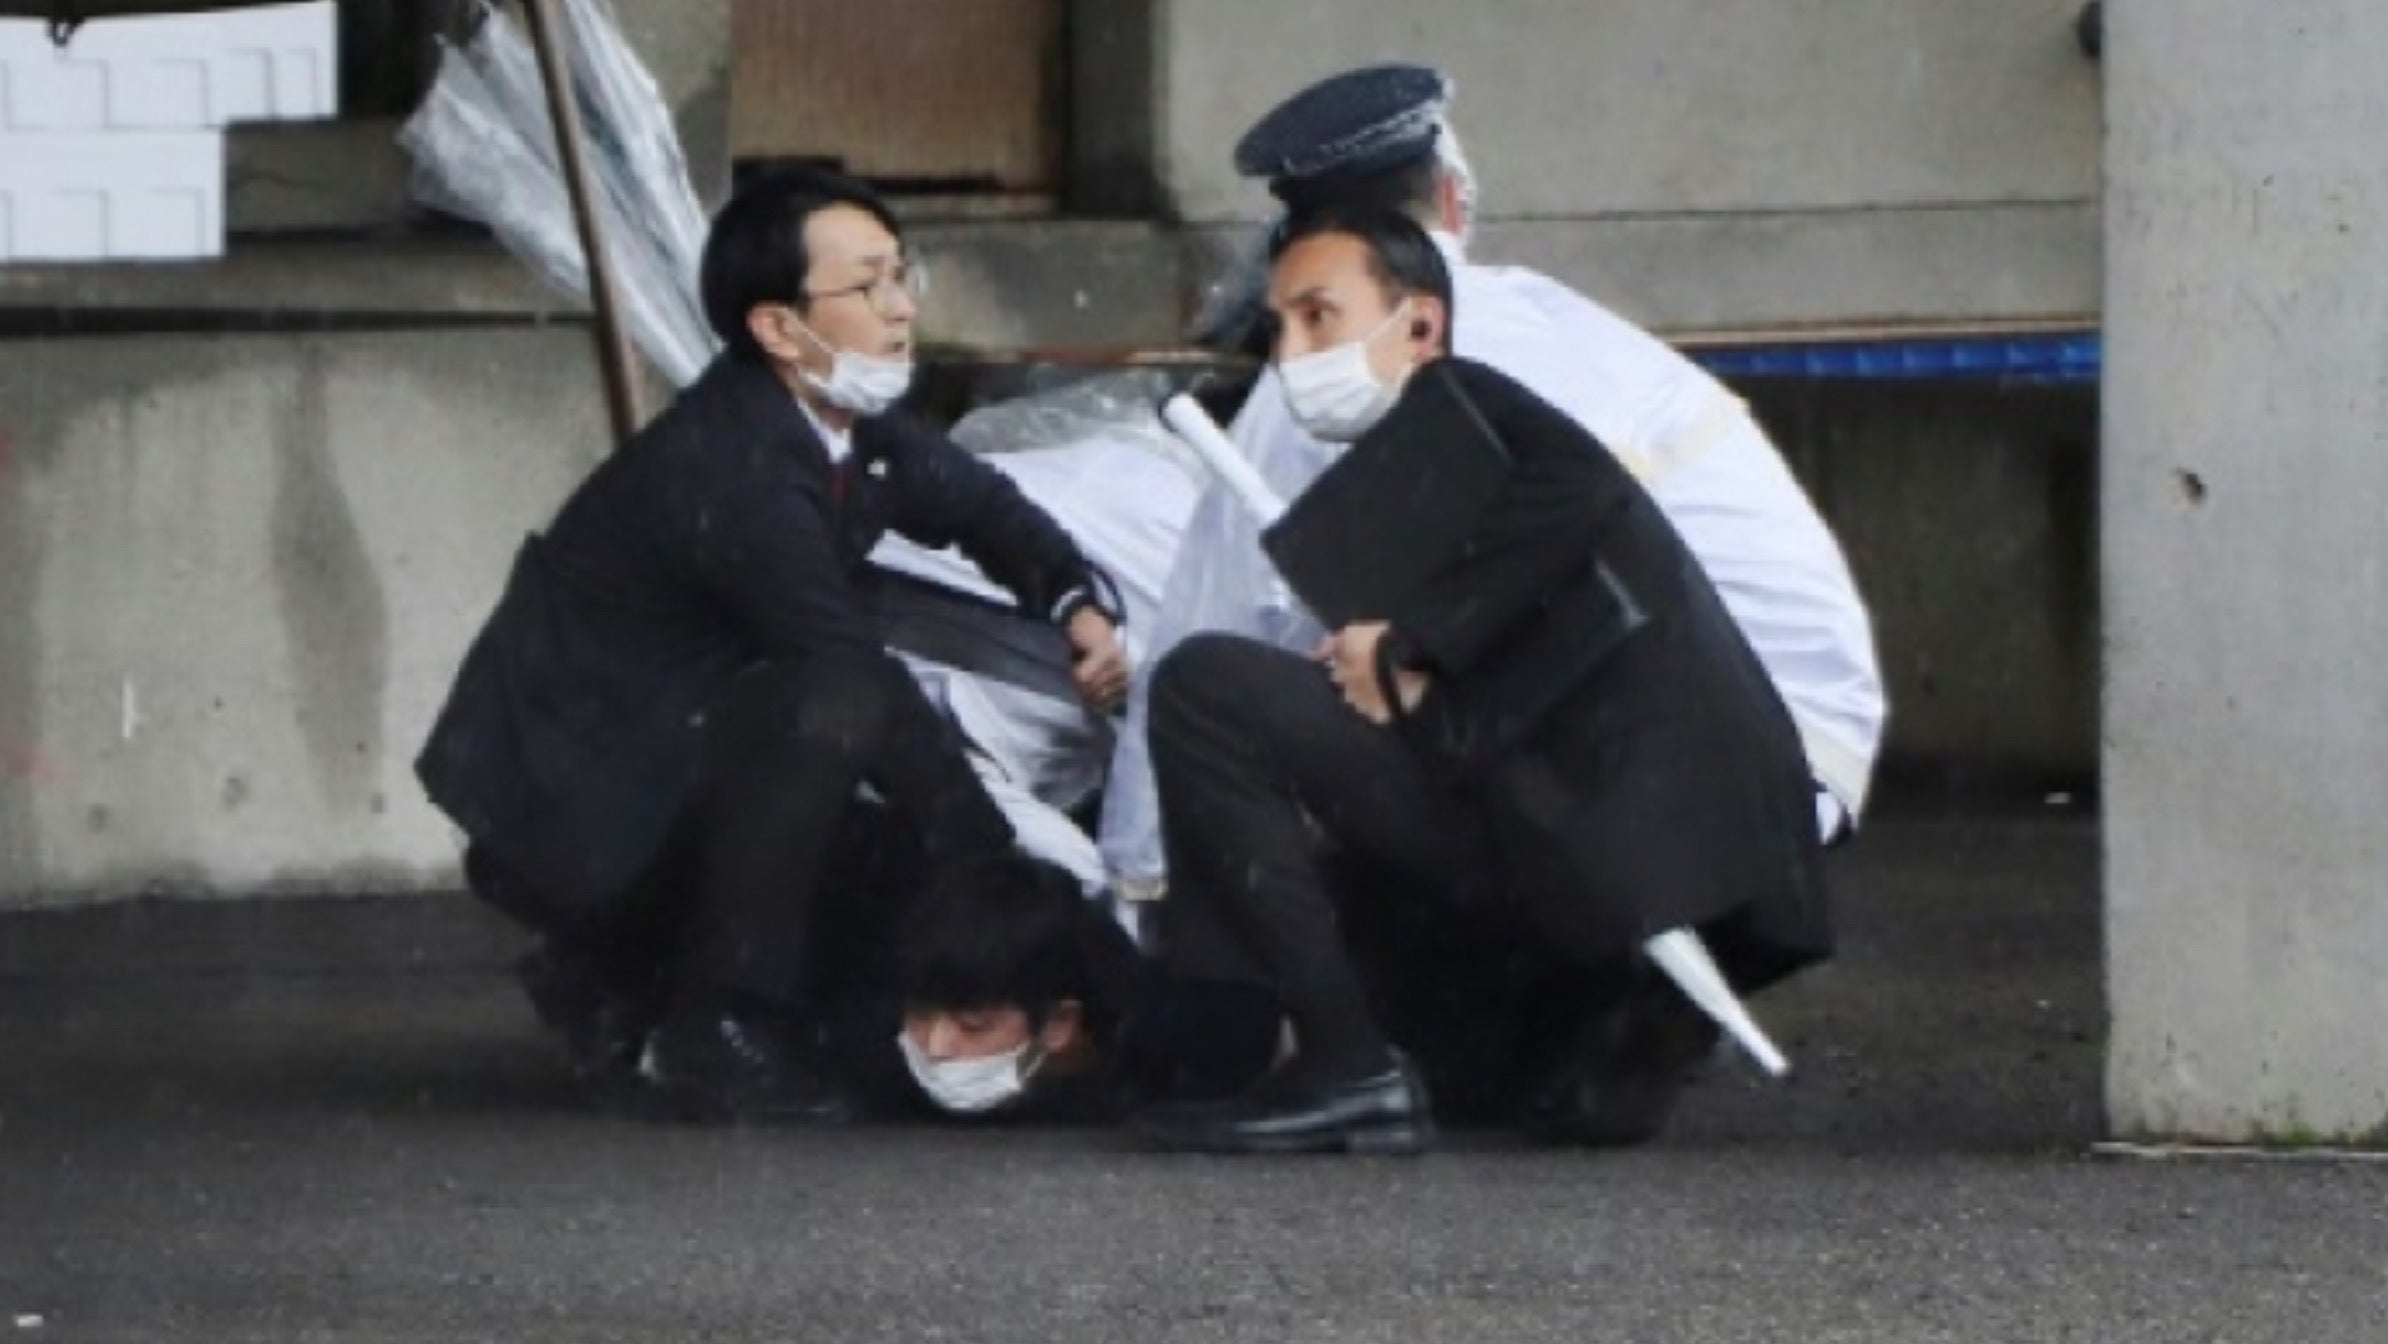 Panic in Japan: the Prime Minister evacuated after an explosion during a speech, Magnate Daily